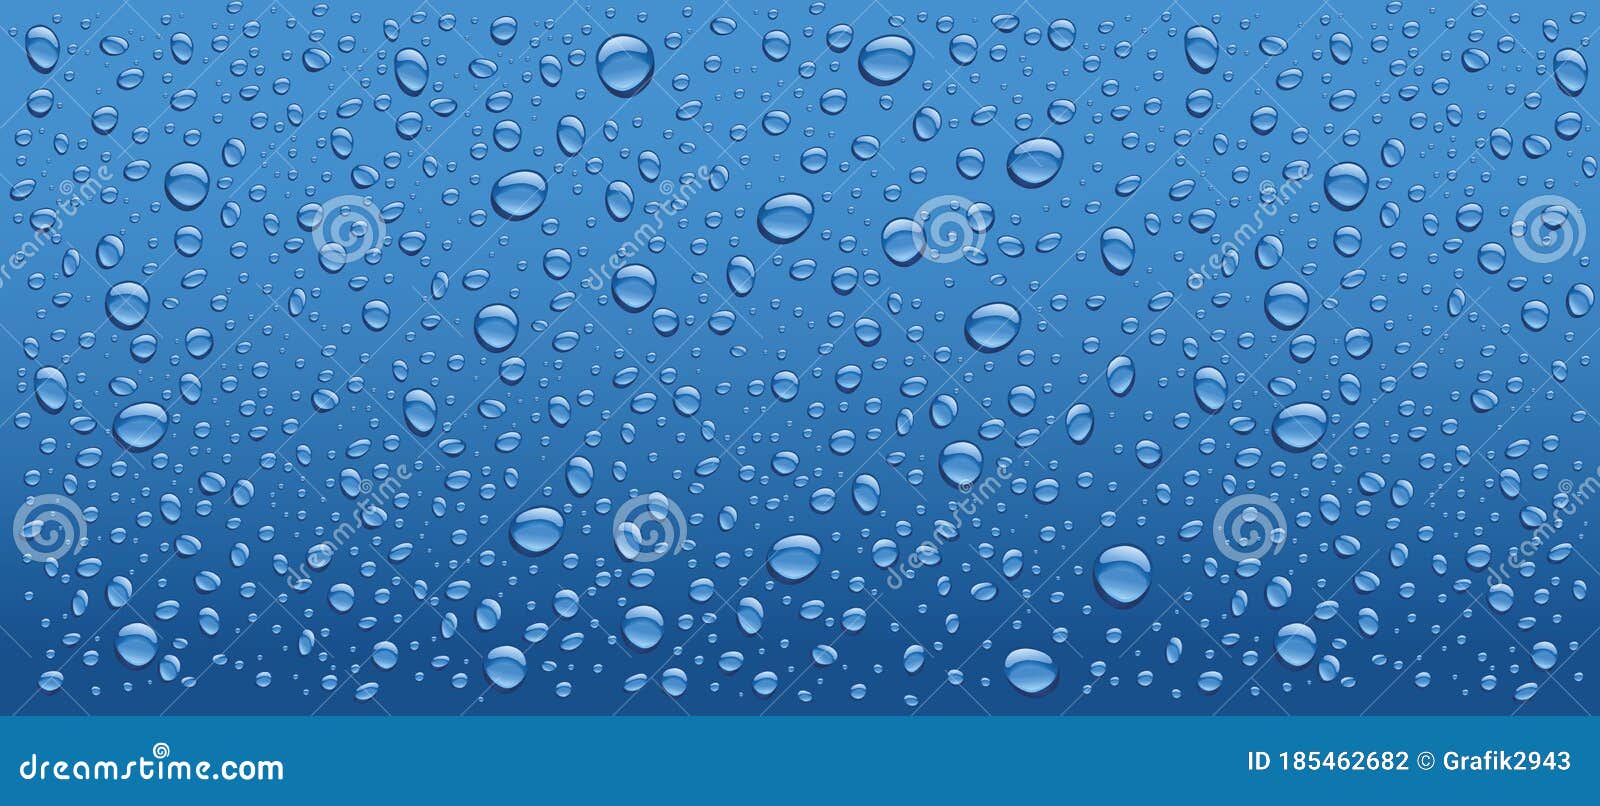 many fresh water drops on blue background